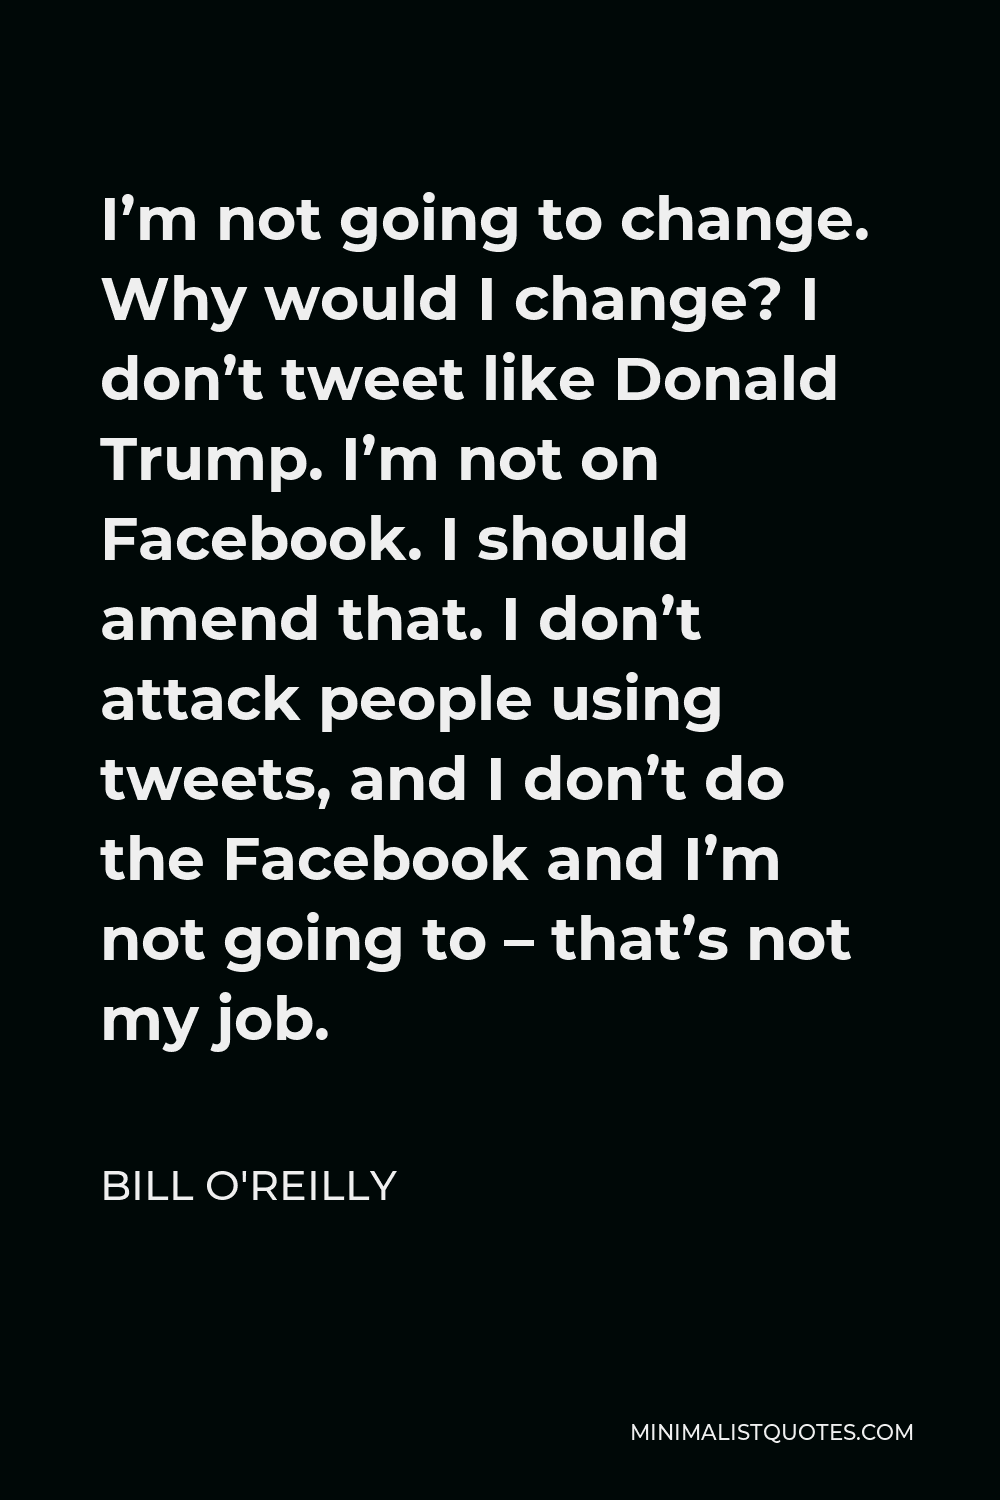 Bill O'Reilly Quote - I’m not going to change. Why would I change? I don’t tweet like Donald Trump. I’m not on Facebook. I should amend that. I don’t attack people using tweets, and I don’t do the Facebook and I’m not going to – that’s not my job.